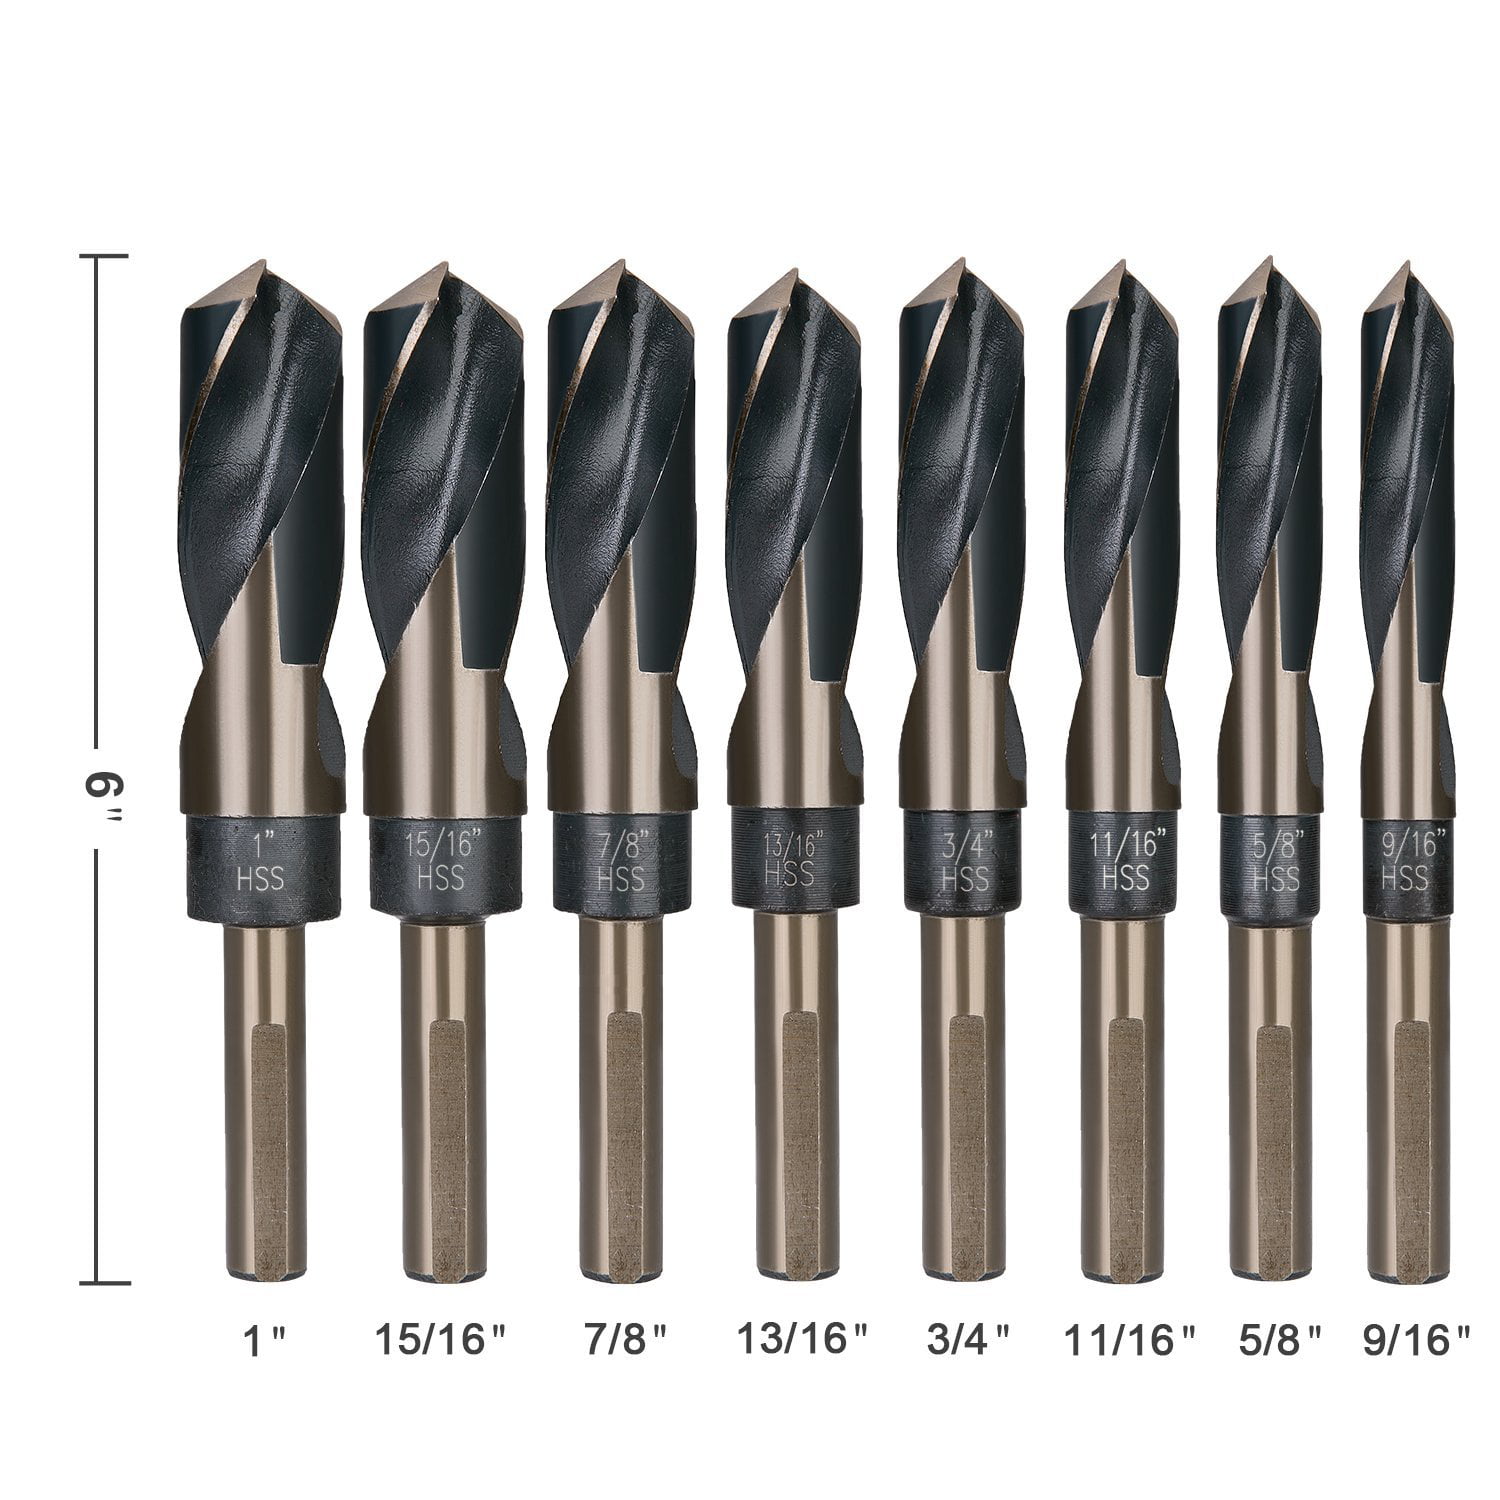 High Speed Steel SAE Size 9/16” 1” by 1/16th 8-Piece 1/2” Tri-Flat Shank Silver and Deming Drill Bit Set in Aluminum Carry Case HSS 